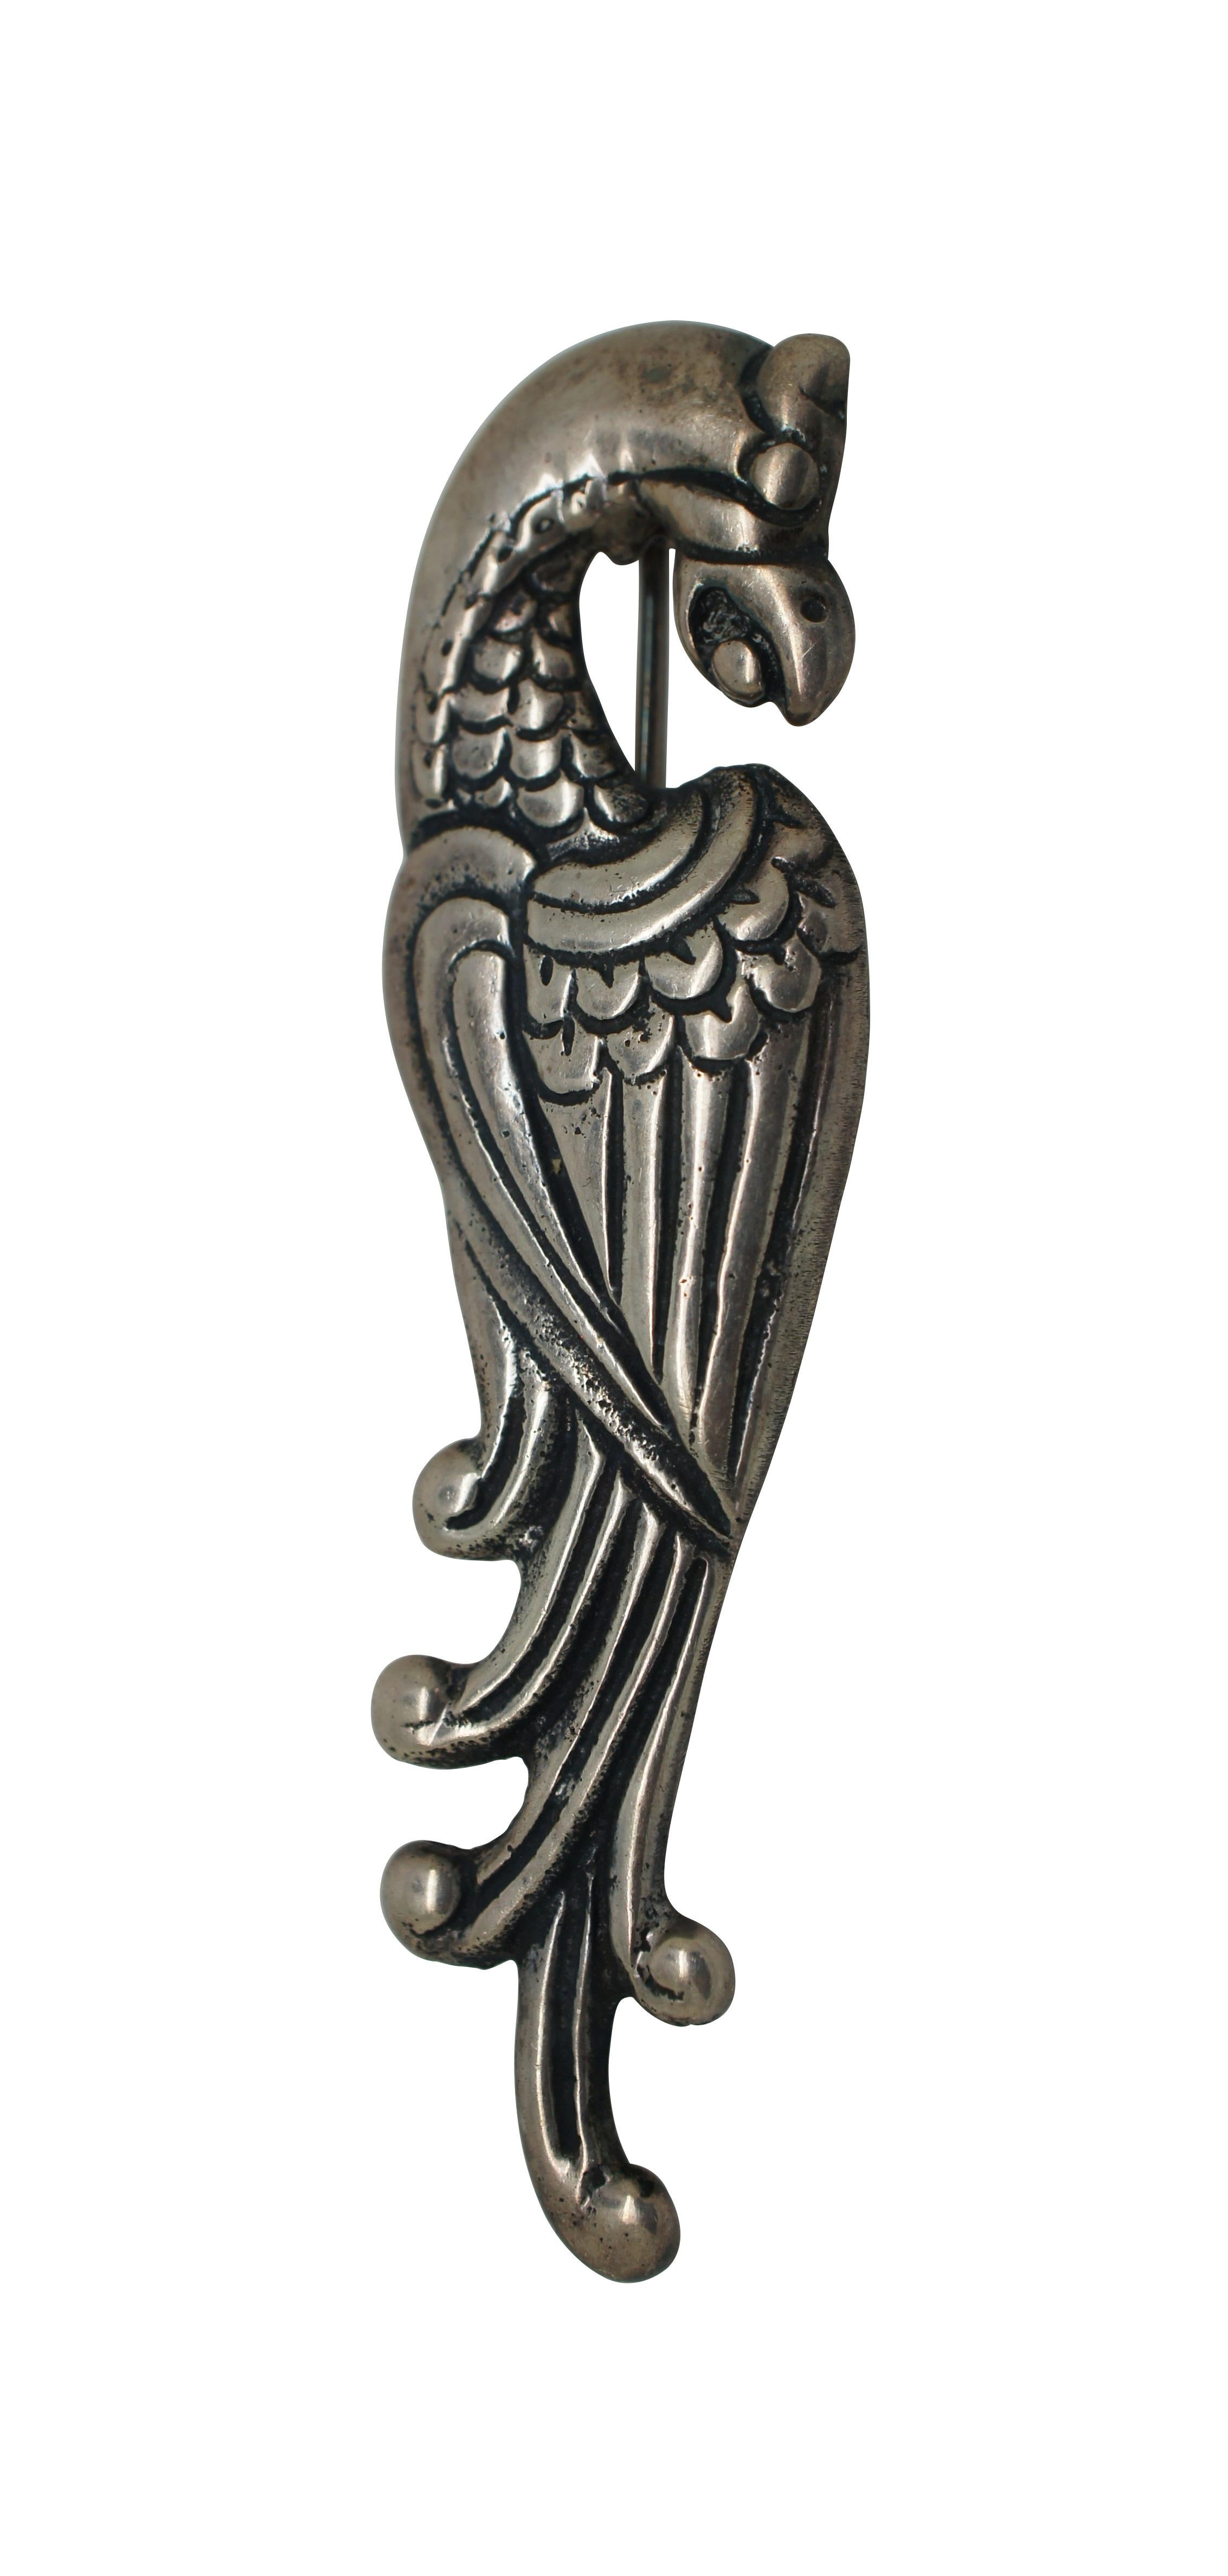 Vintage Mexican sterling silver pin / brooch in the shape of a heraldic Quetzal bird / Eagle / Dragon or Phoenix with a small ball in its beak.  Marked Sterling on verso. Straight pin back.

Dimensions:
0.875” x 0.125” x 3.125” (Width x Depth x